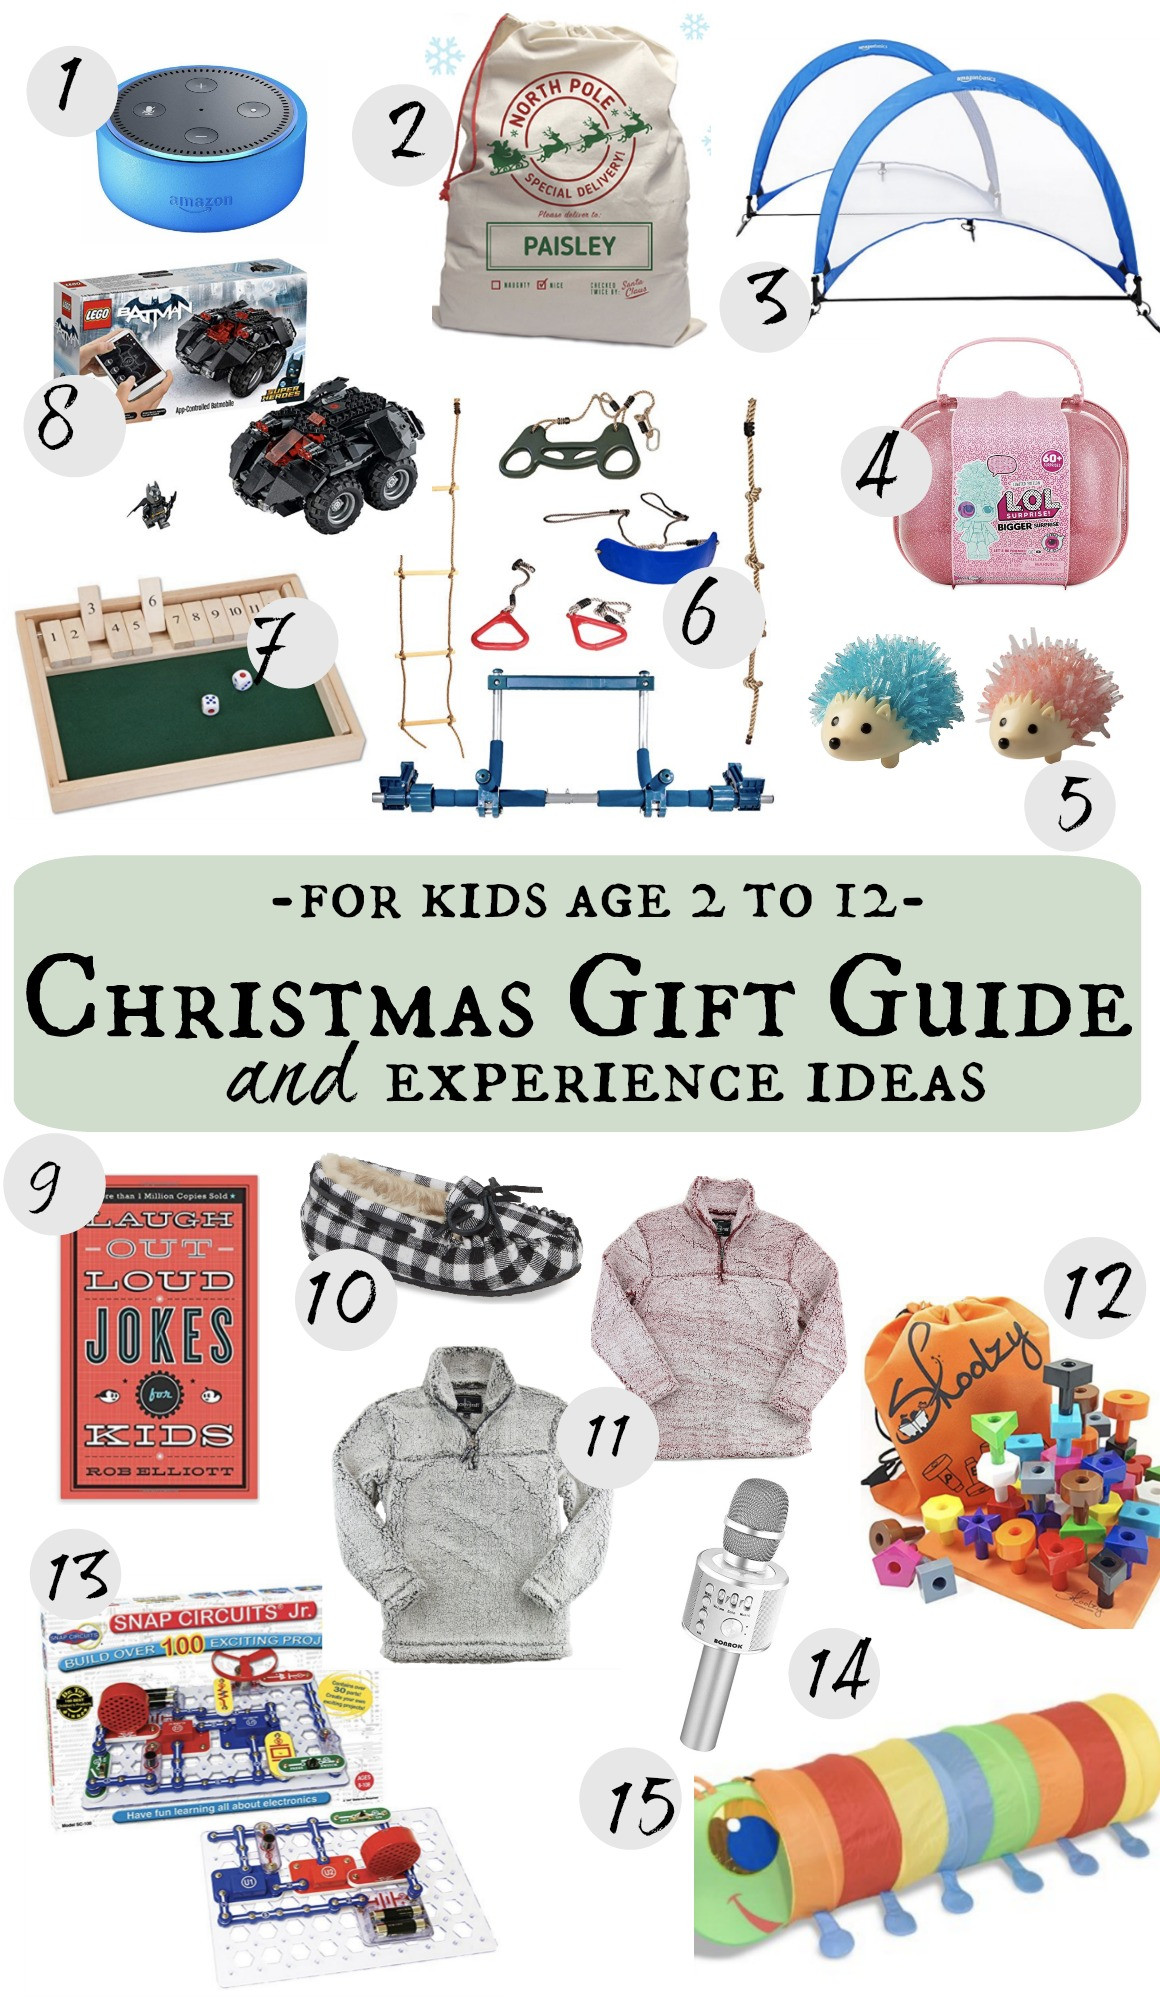 Holiday Gift Guides For Kids
 Christmas Gift Guide for Kids with Experience Ideas too